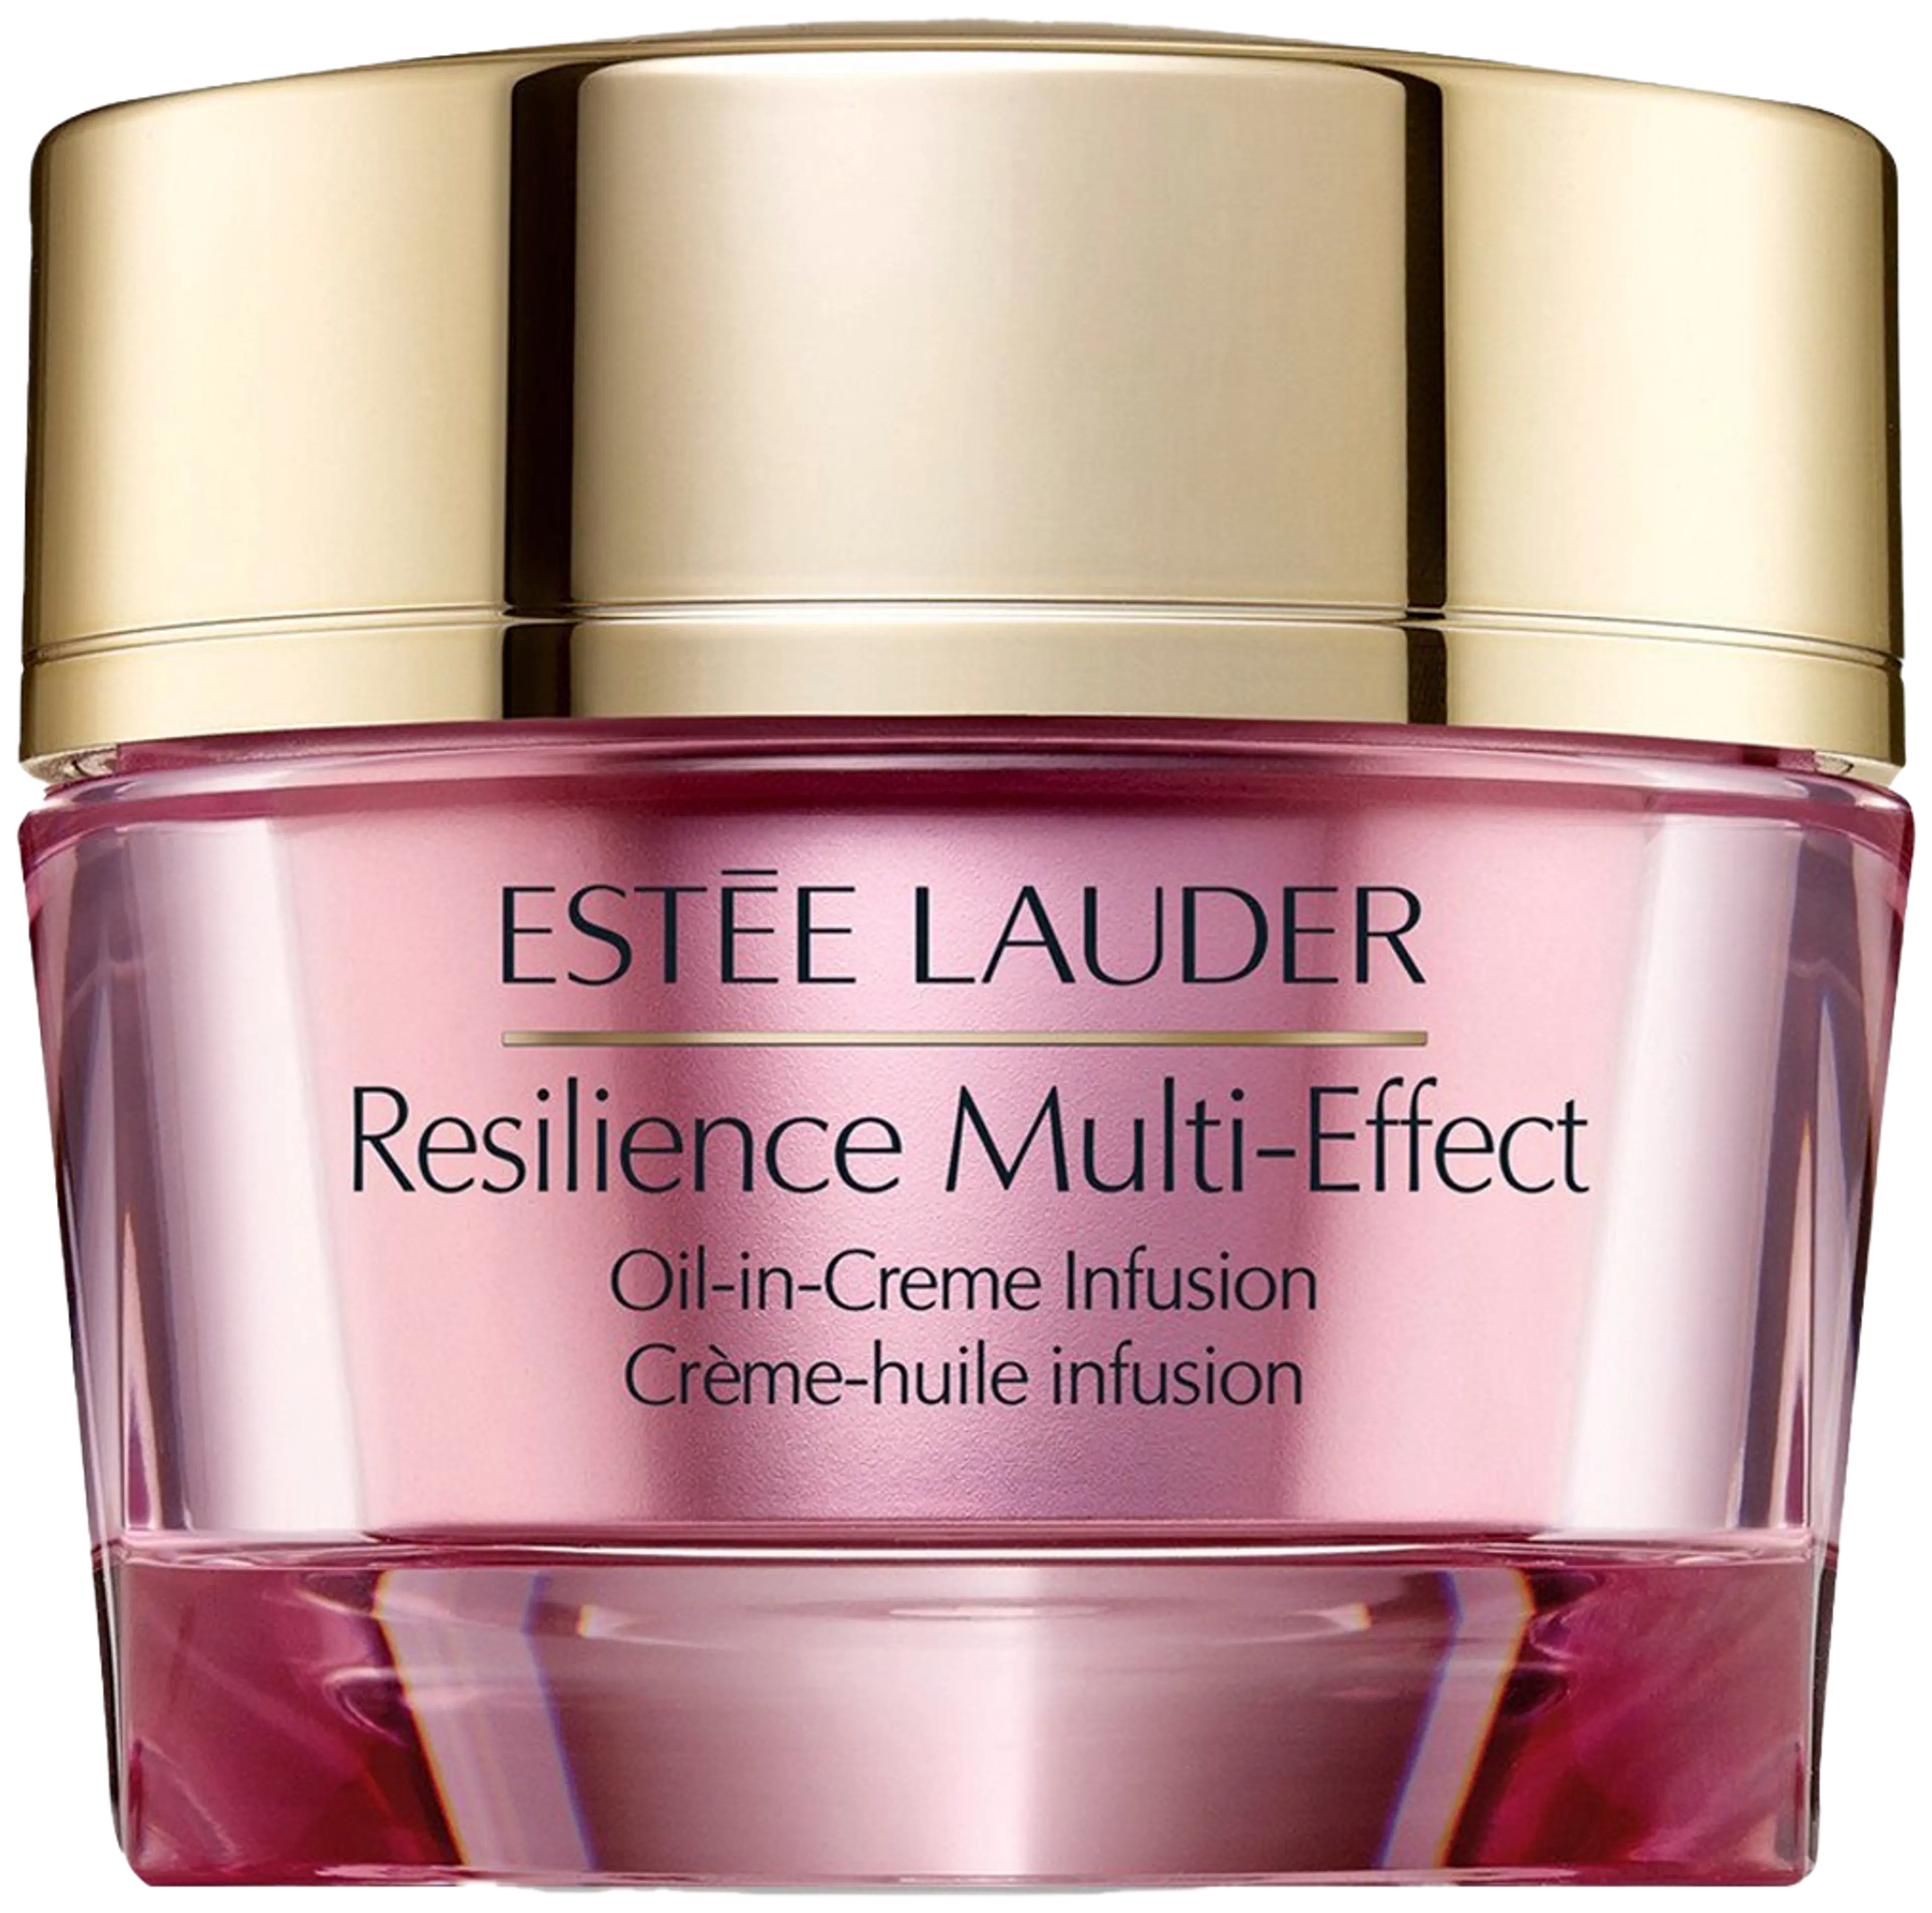 Estée Lauder Resilience Lift  Firming/Sculpting Oil-in-Creme Infusion hoitovoide 50 ml